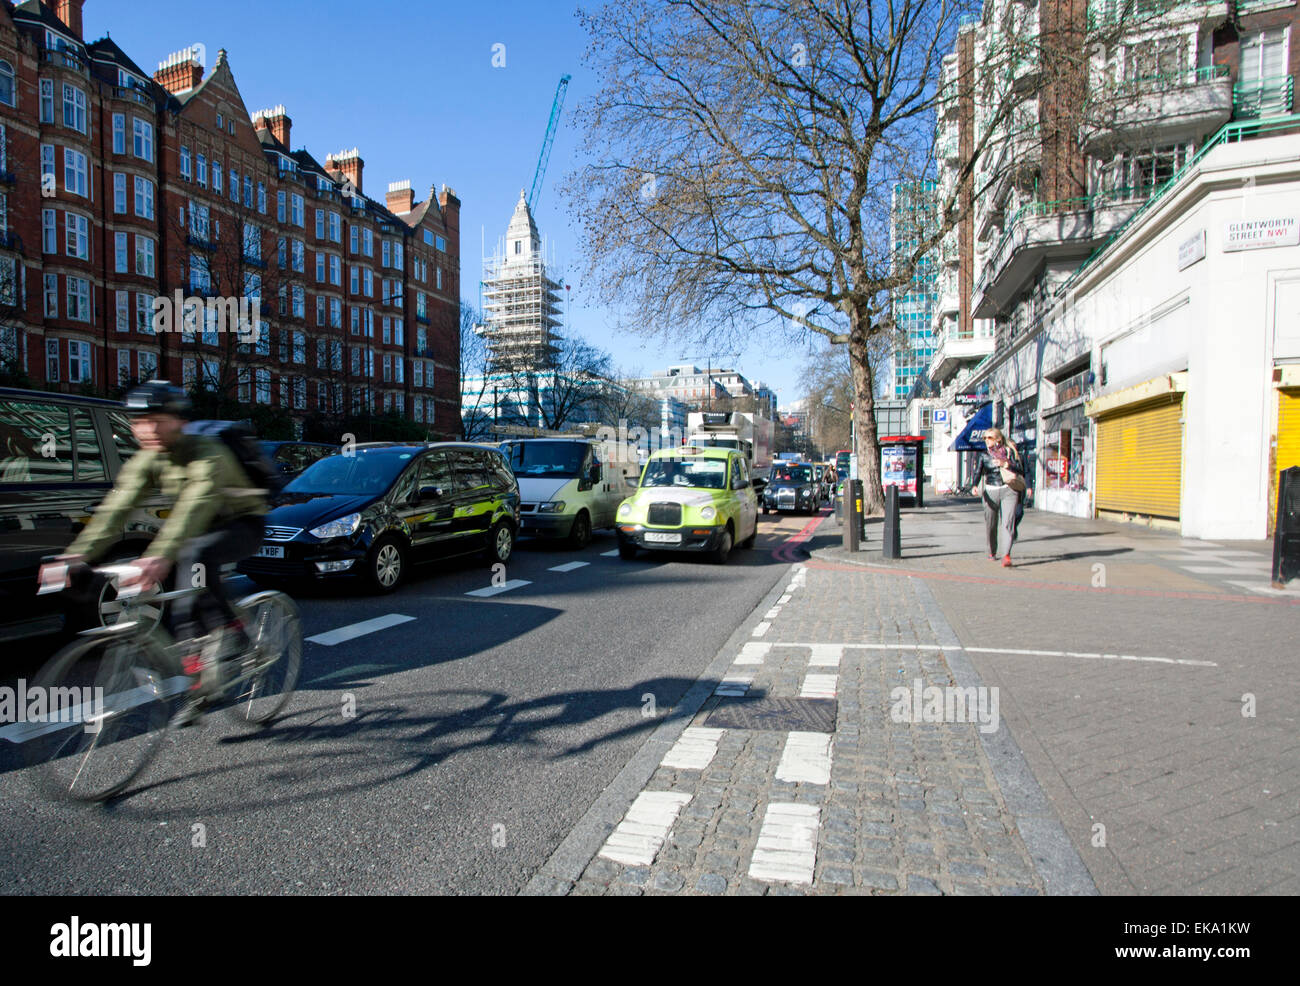 Junction of Marylebone Road and Glentworth Street one of worst places in London for traffic pollution Stock Photo